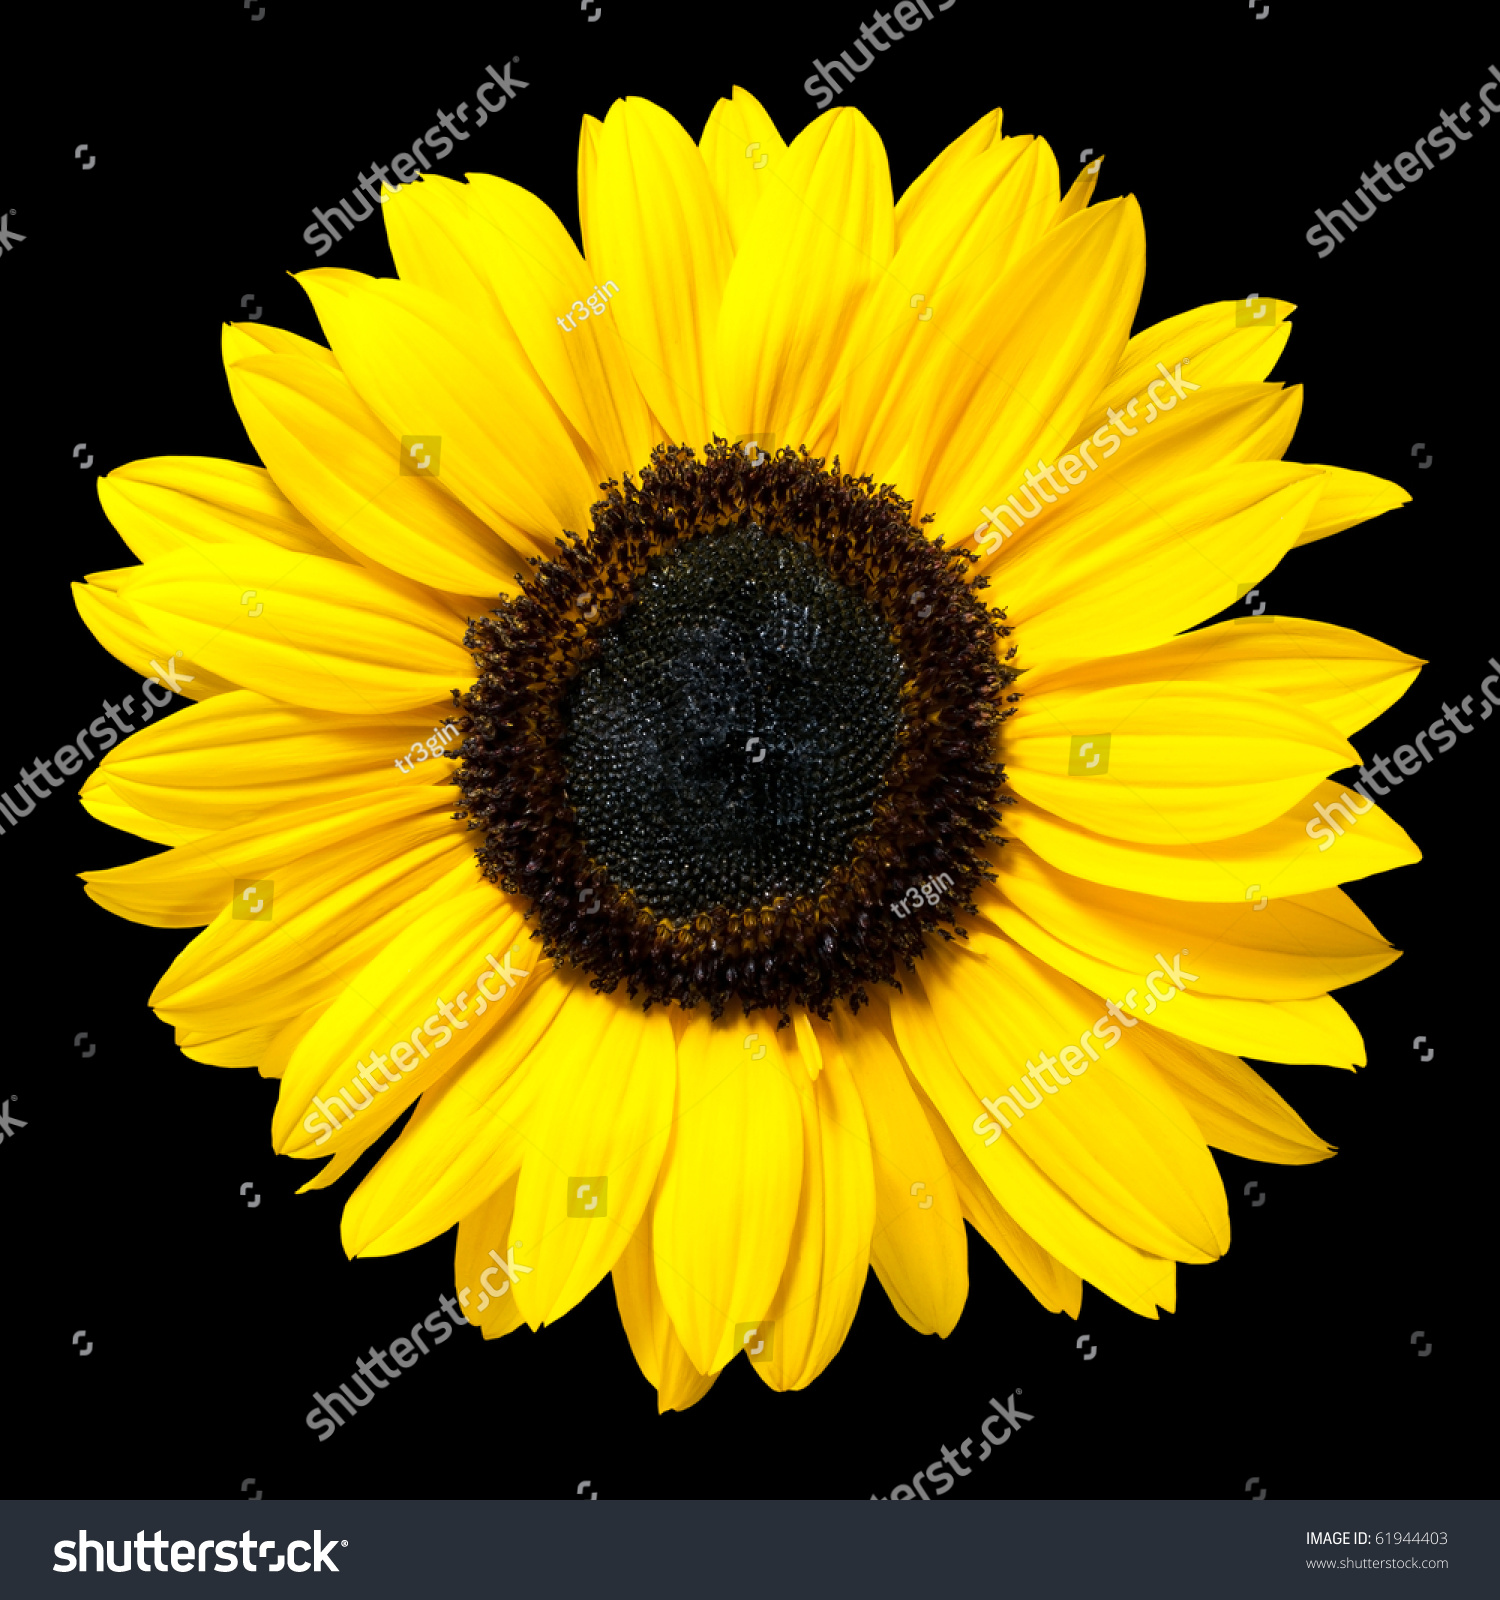 How many petals does a sunflower have?